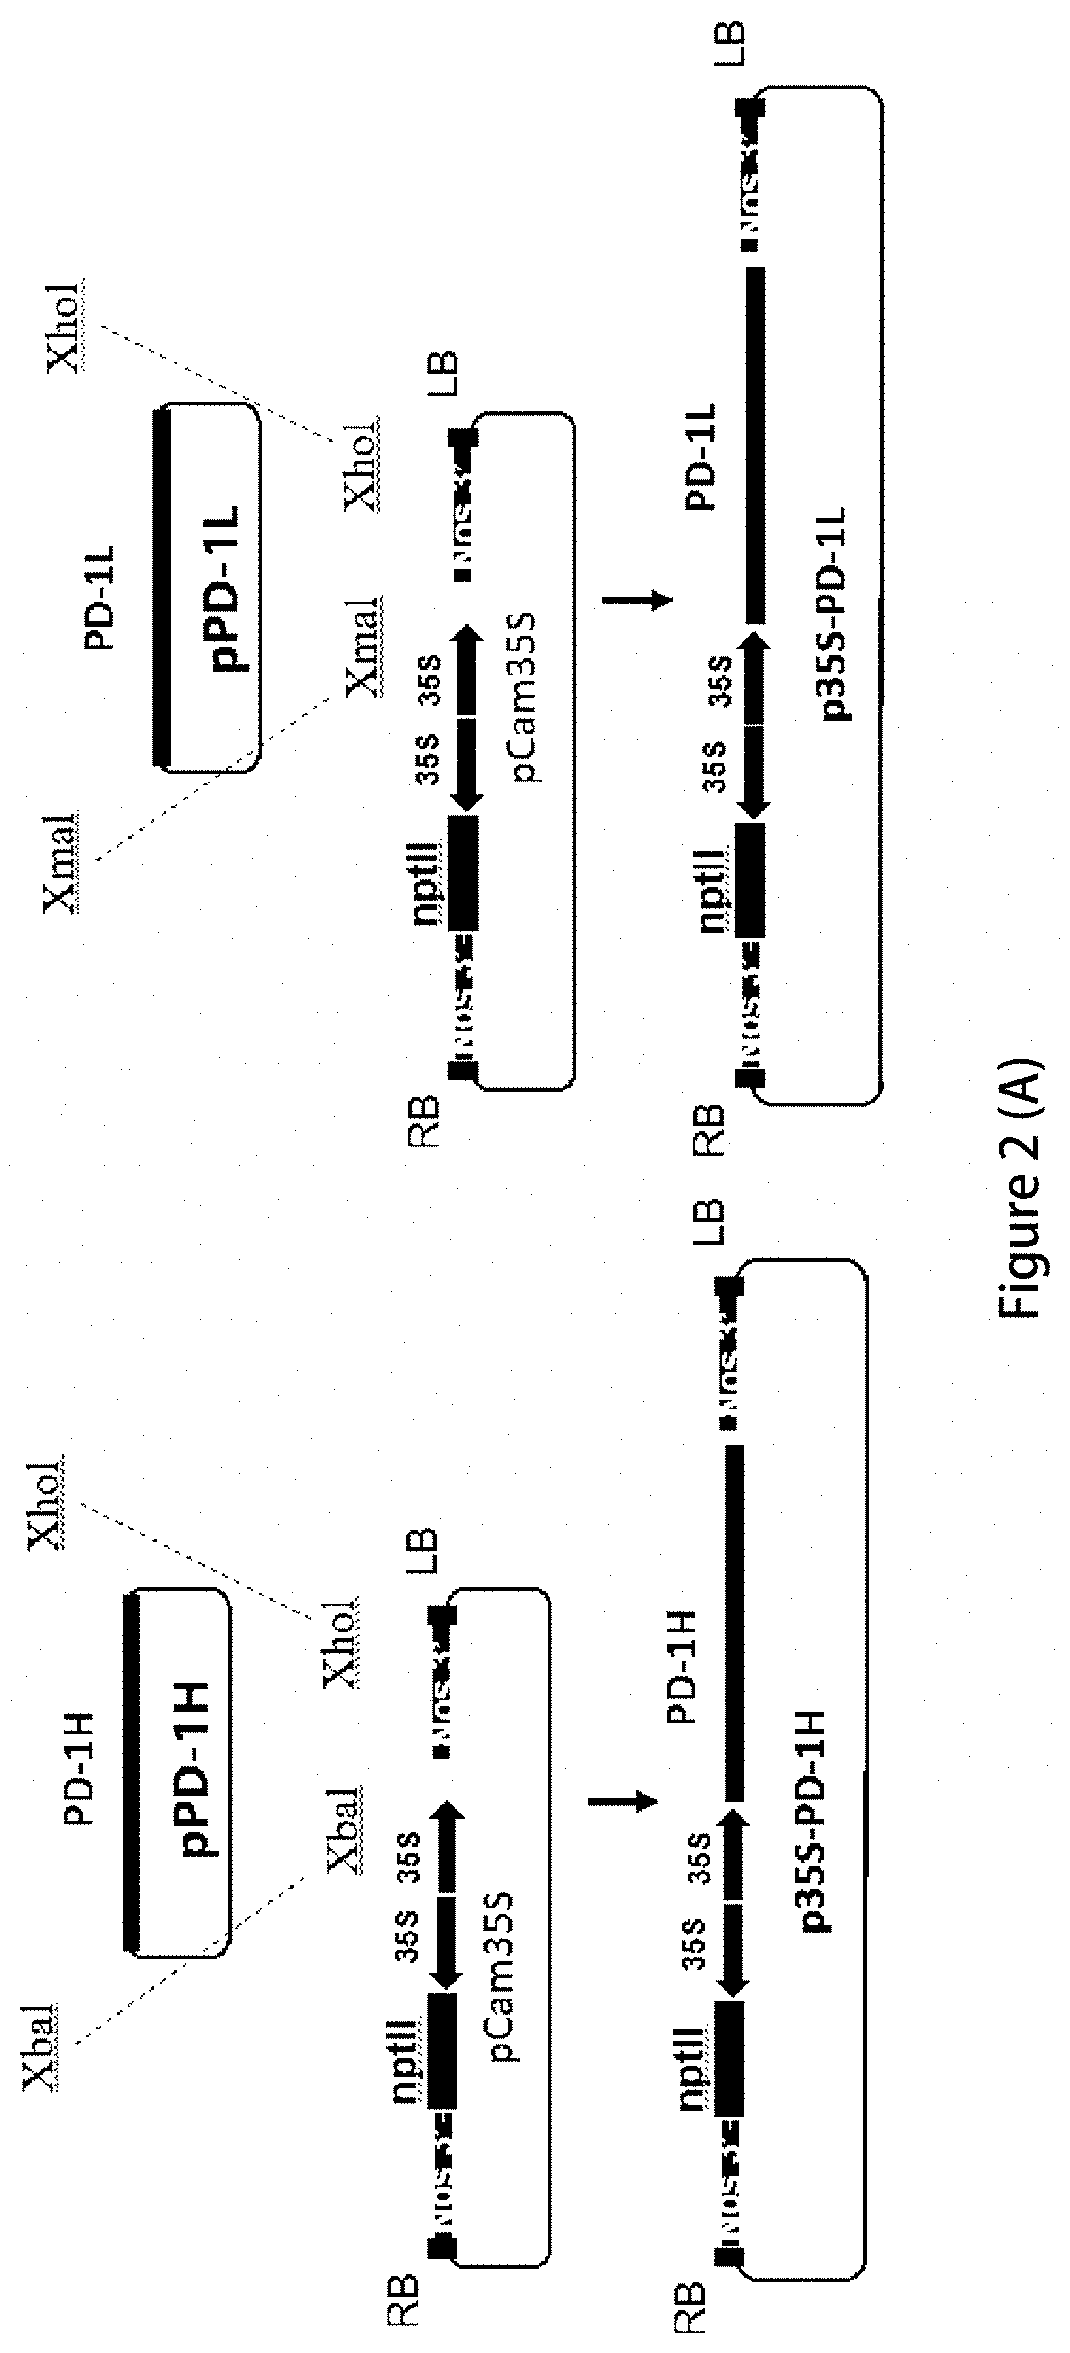 Application of plant as host in expressing pd-1 antibody and/or pd-l1 antibody